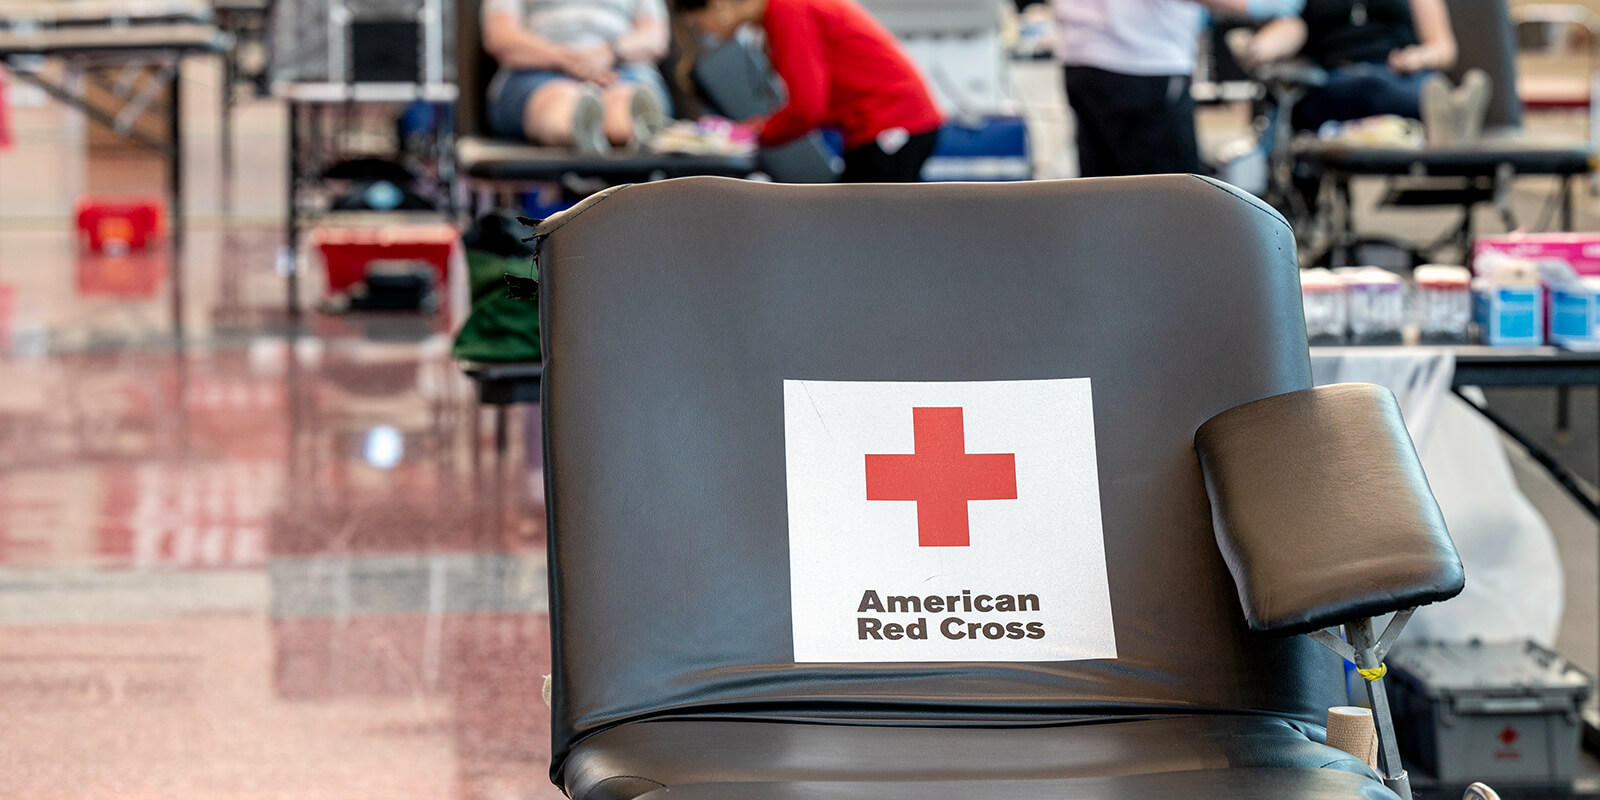 AFSCME supports American Red Cross workers as they struggle for fair treatment and respect